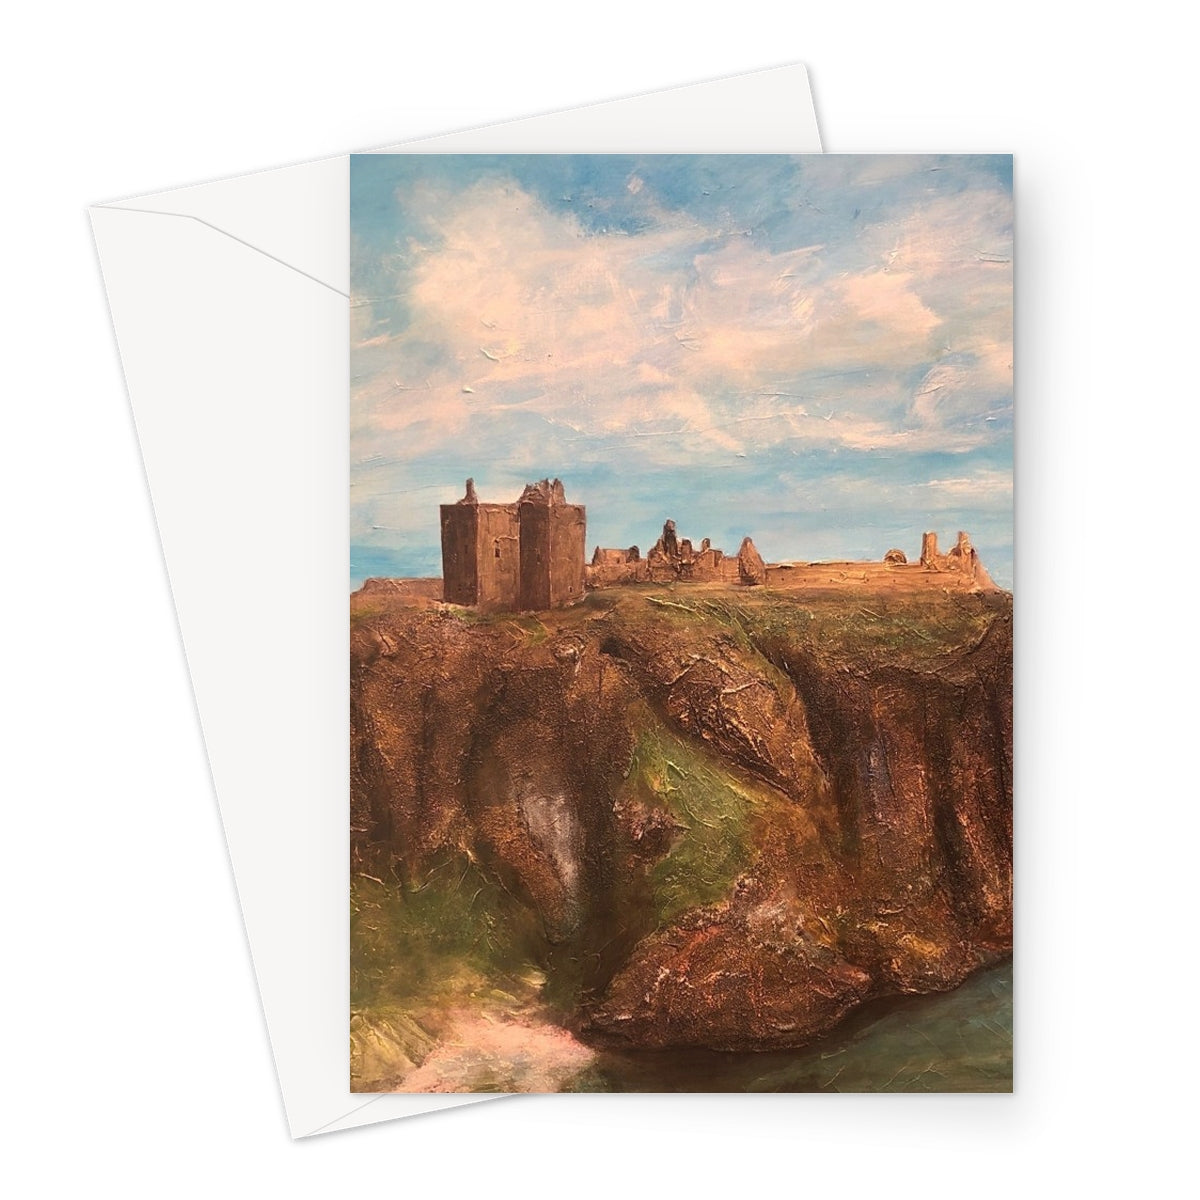 Dunnottar Castle Art Gifts Greeting Card-Stationery-Prodigi-A5 Portrait-10 Cards-Paintings, Prints, Homeware, Art Gifts From Scotland By Scottish Artist Kevin Hunter